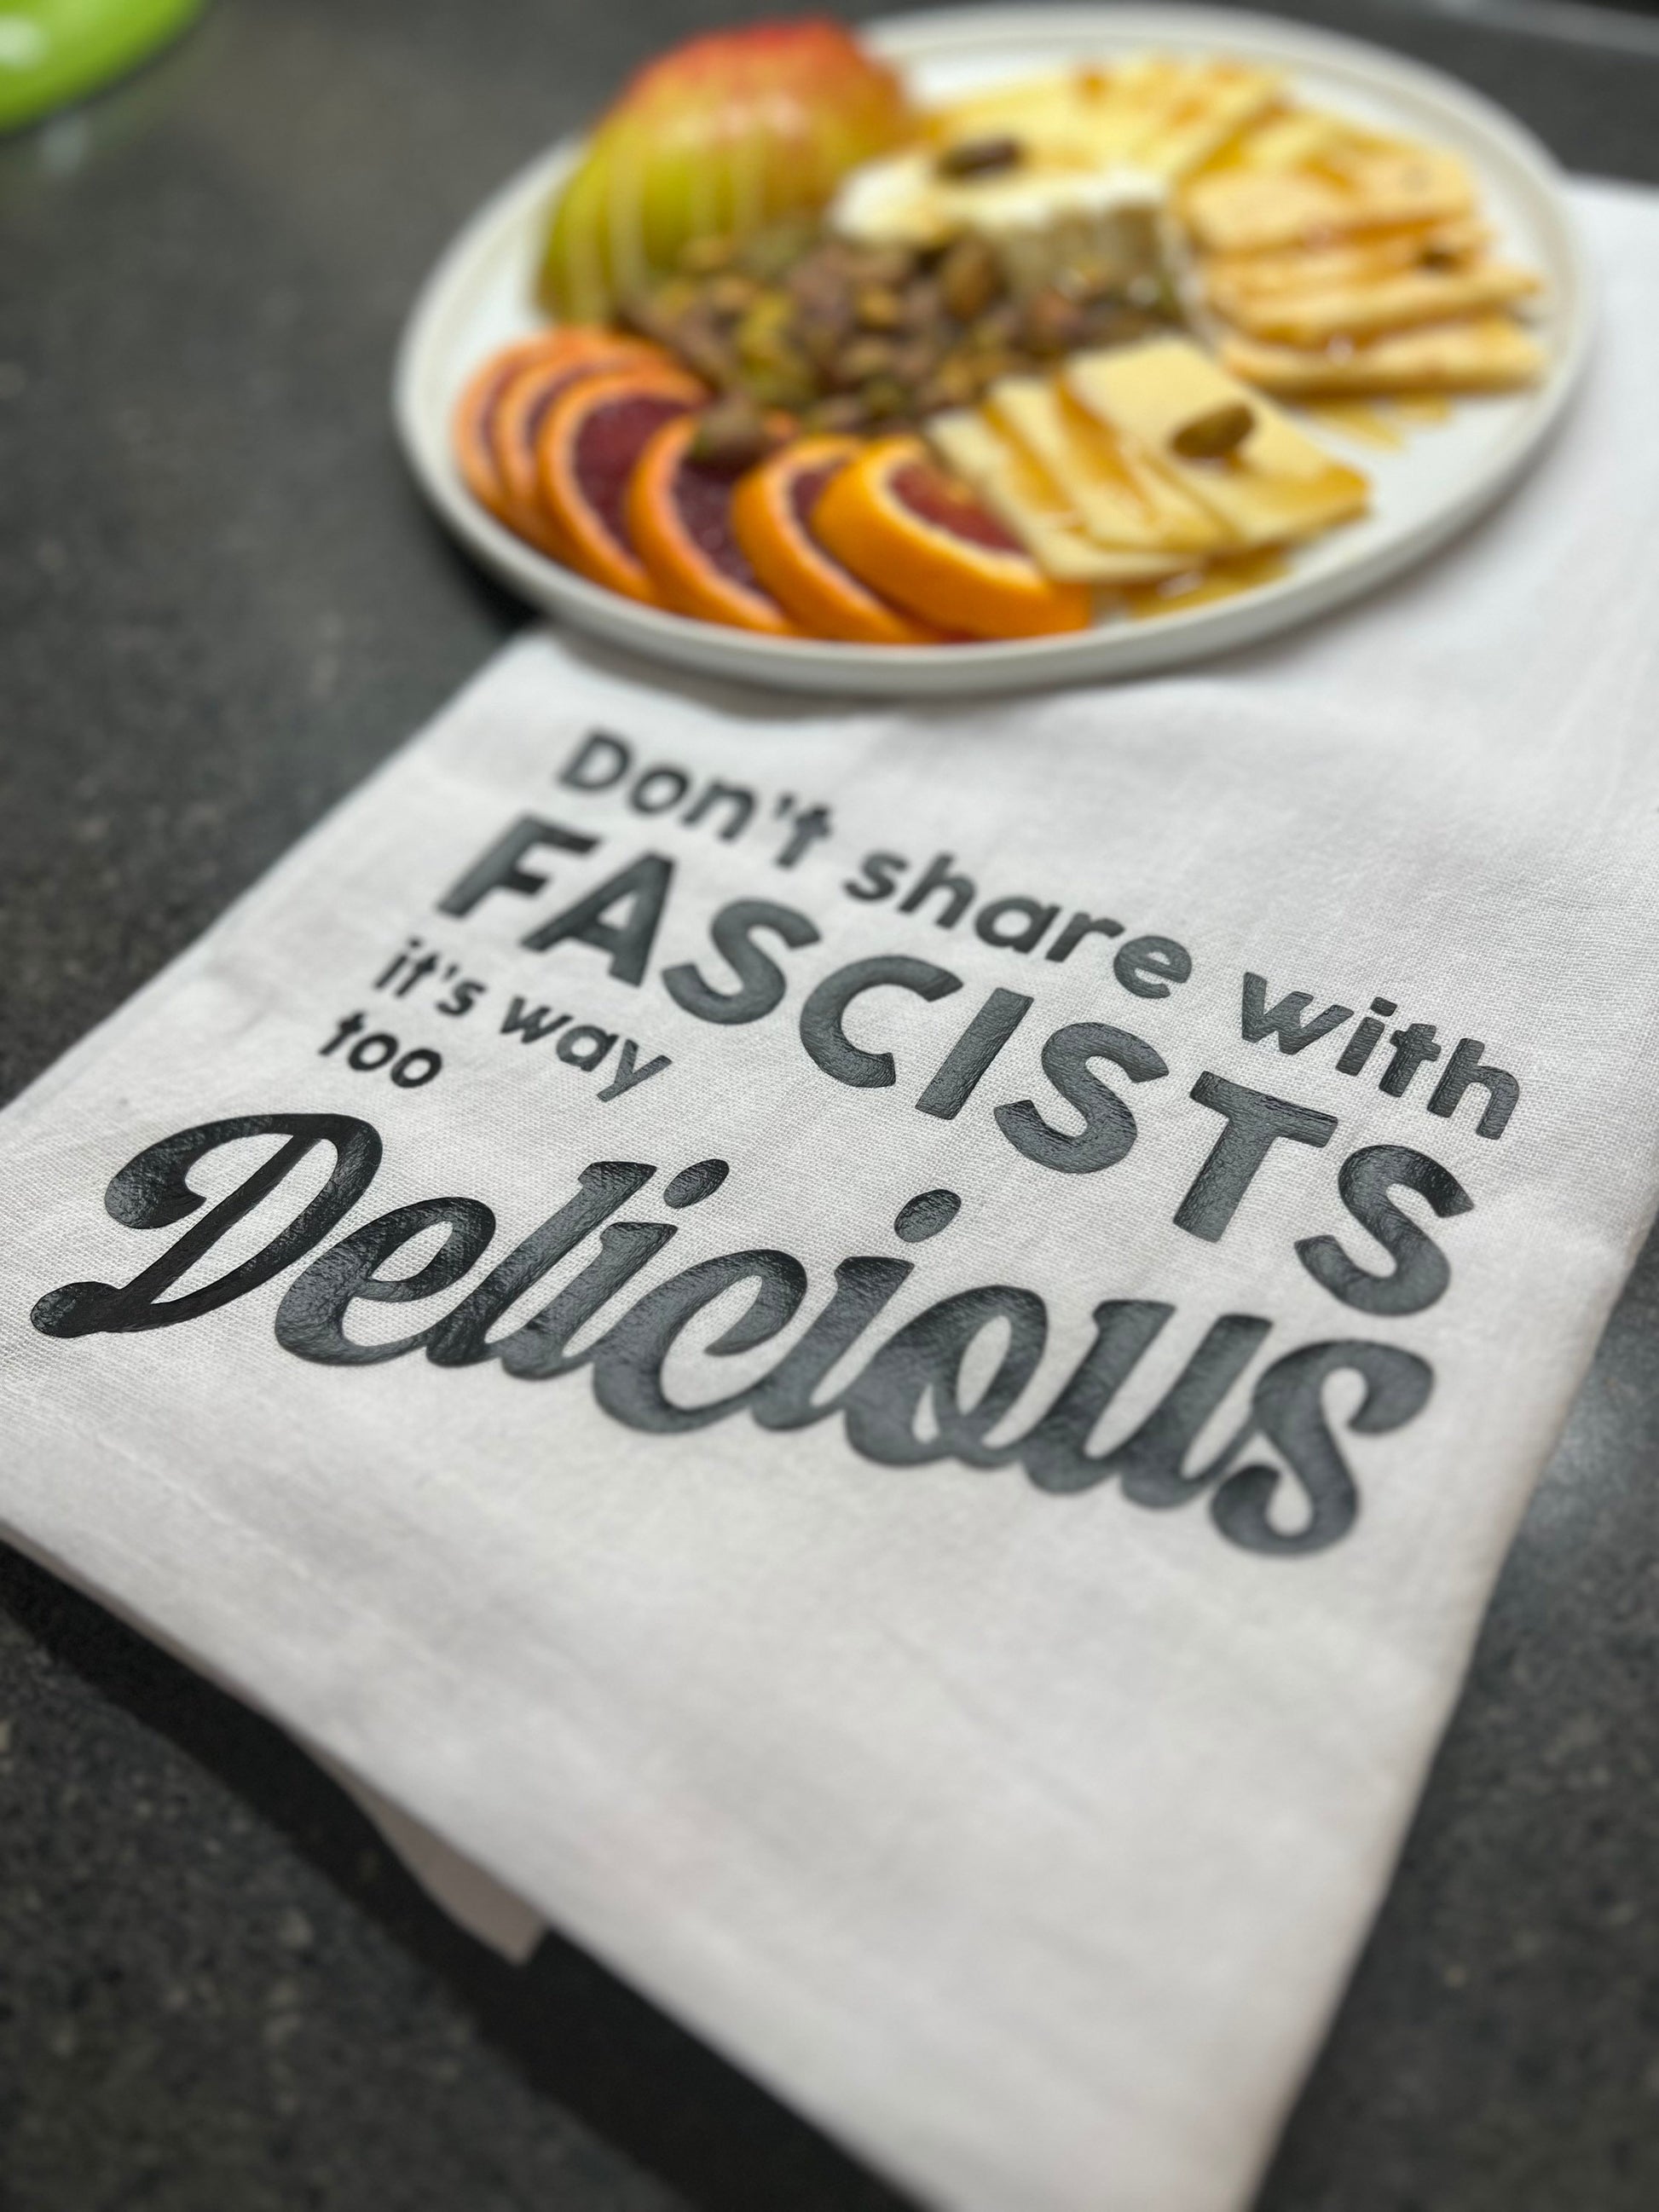 Don’t Share With Fascists it’s Way Too Delicious Tea Towel